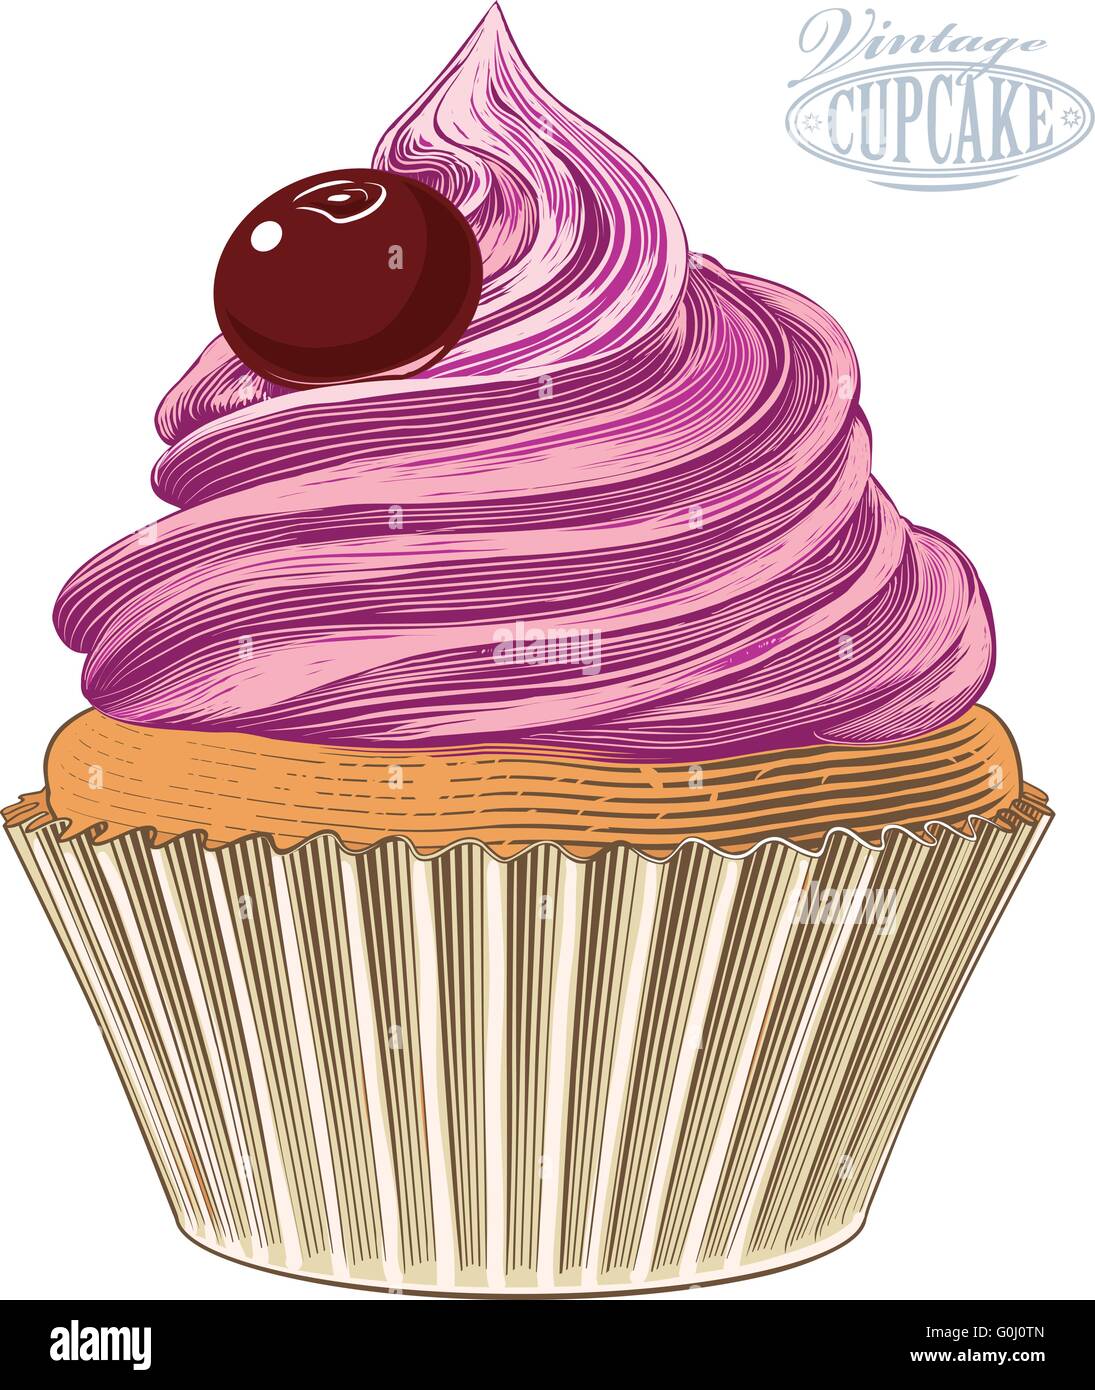 Cupcake in engraving style on transparent background Stock Vector